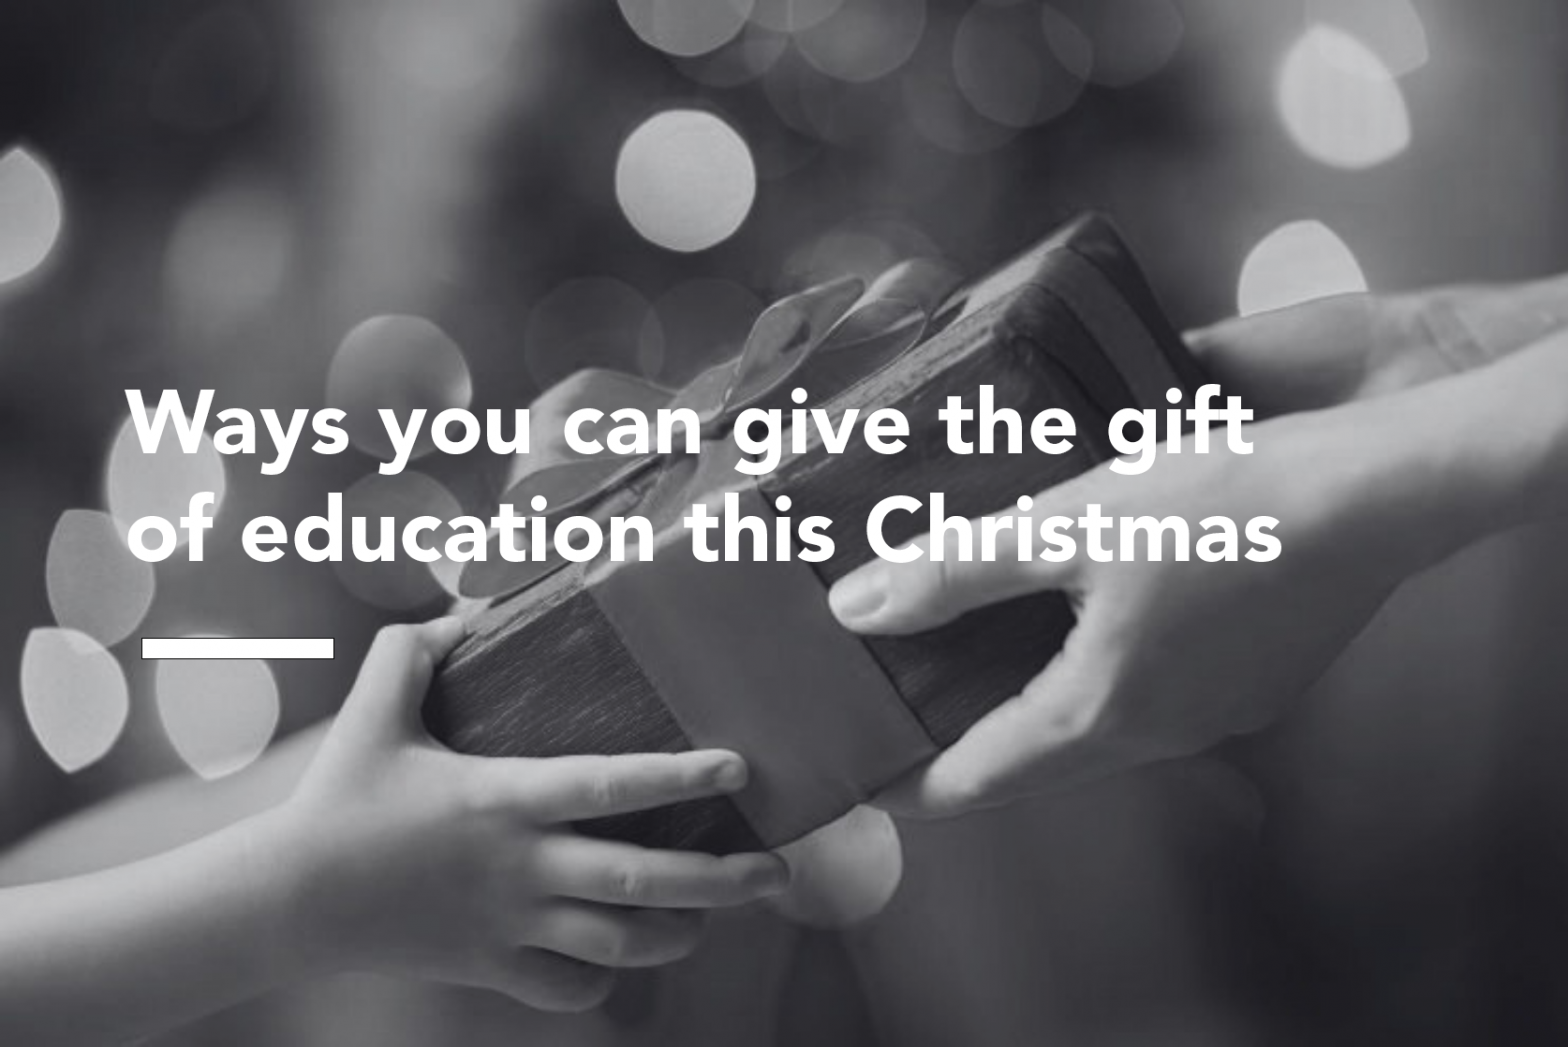 Ways you can give the gift of education this Christmas